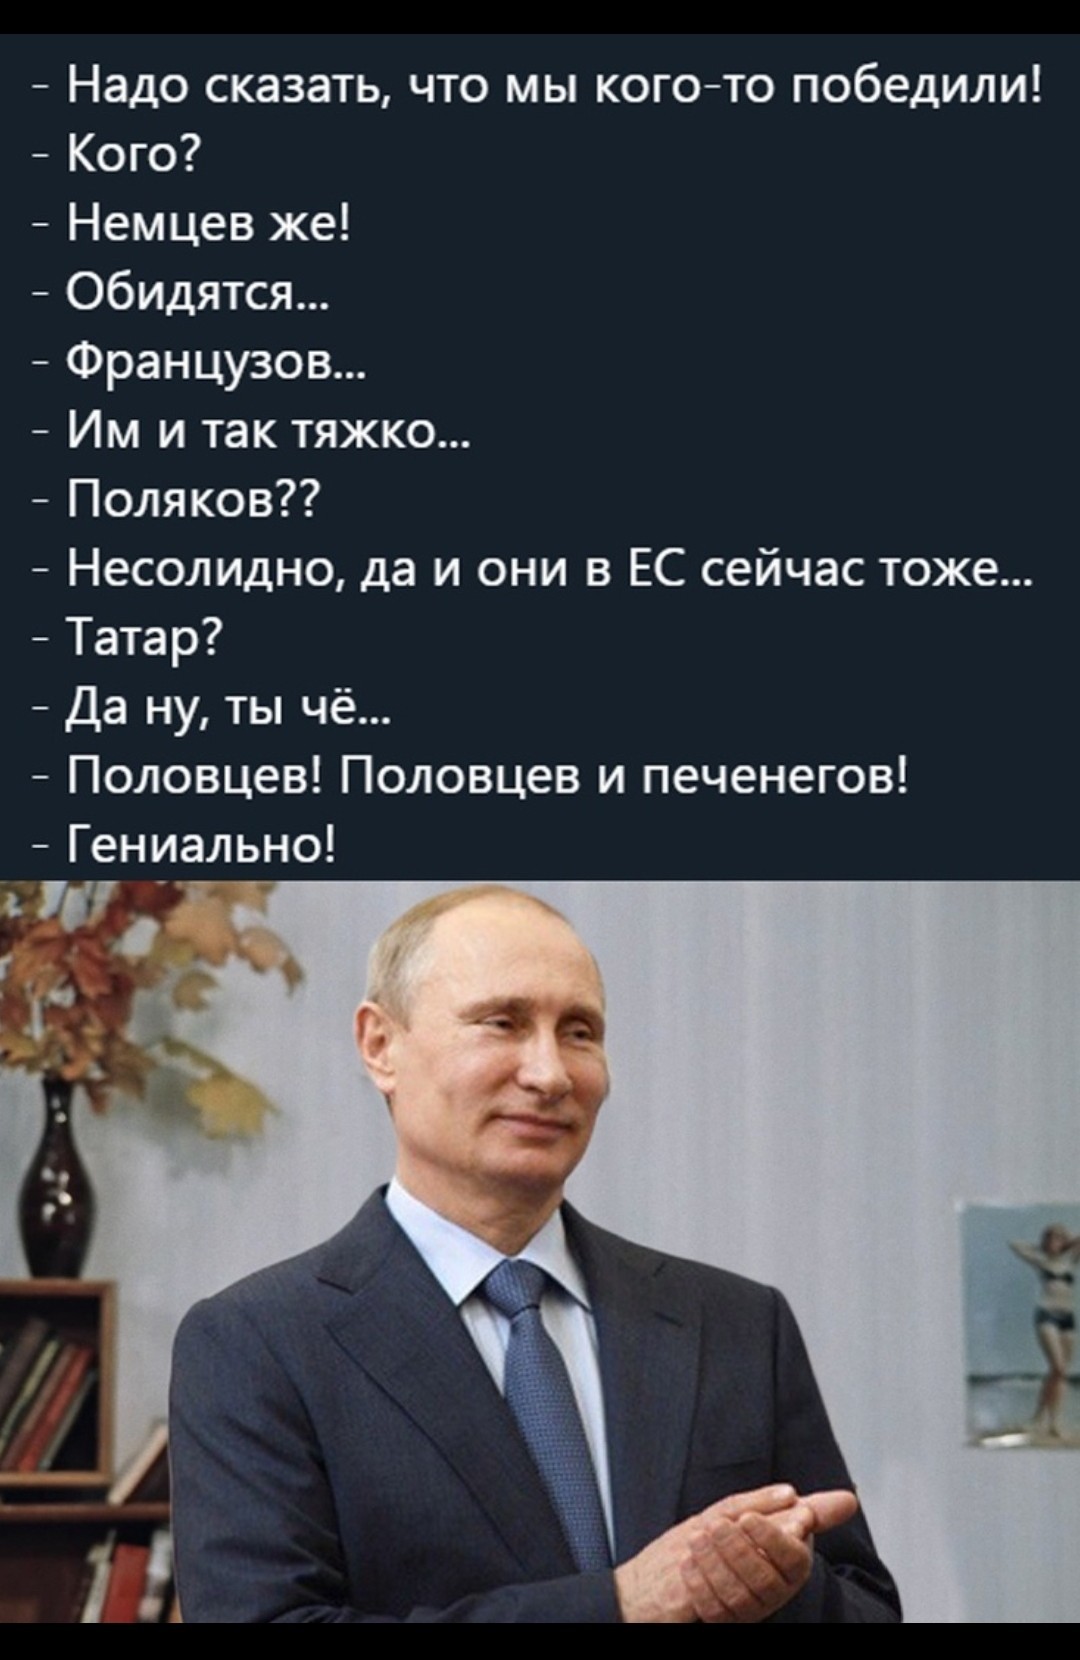 Victory comes first - Vladimir Putin, Pearls, In contact with